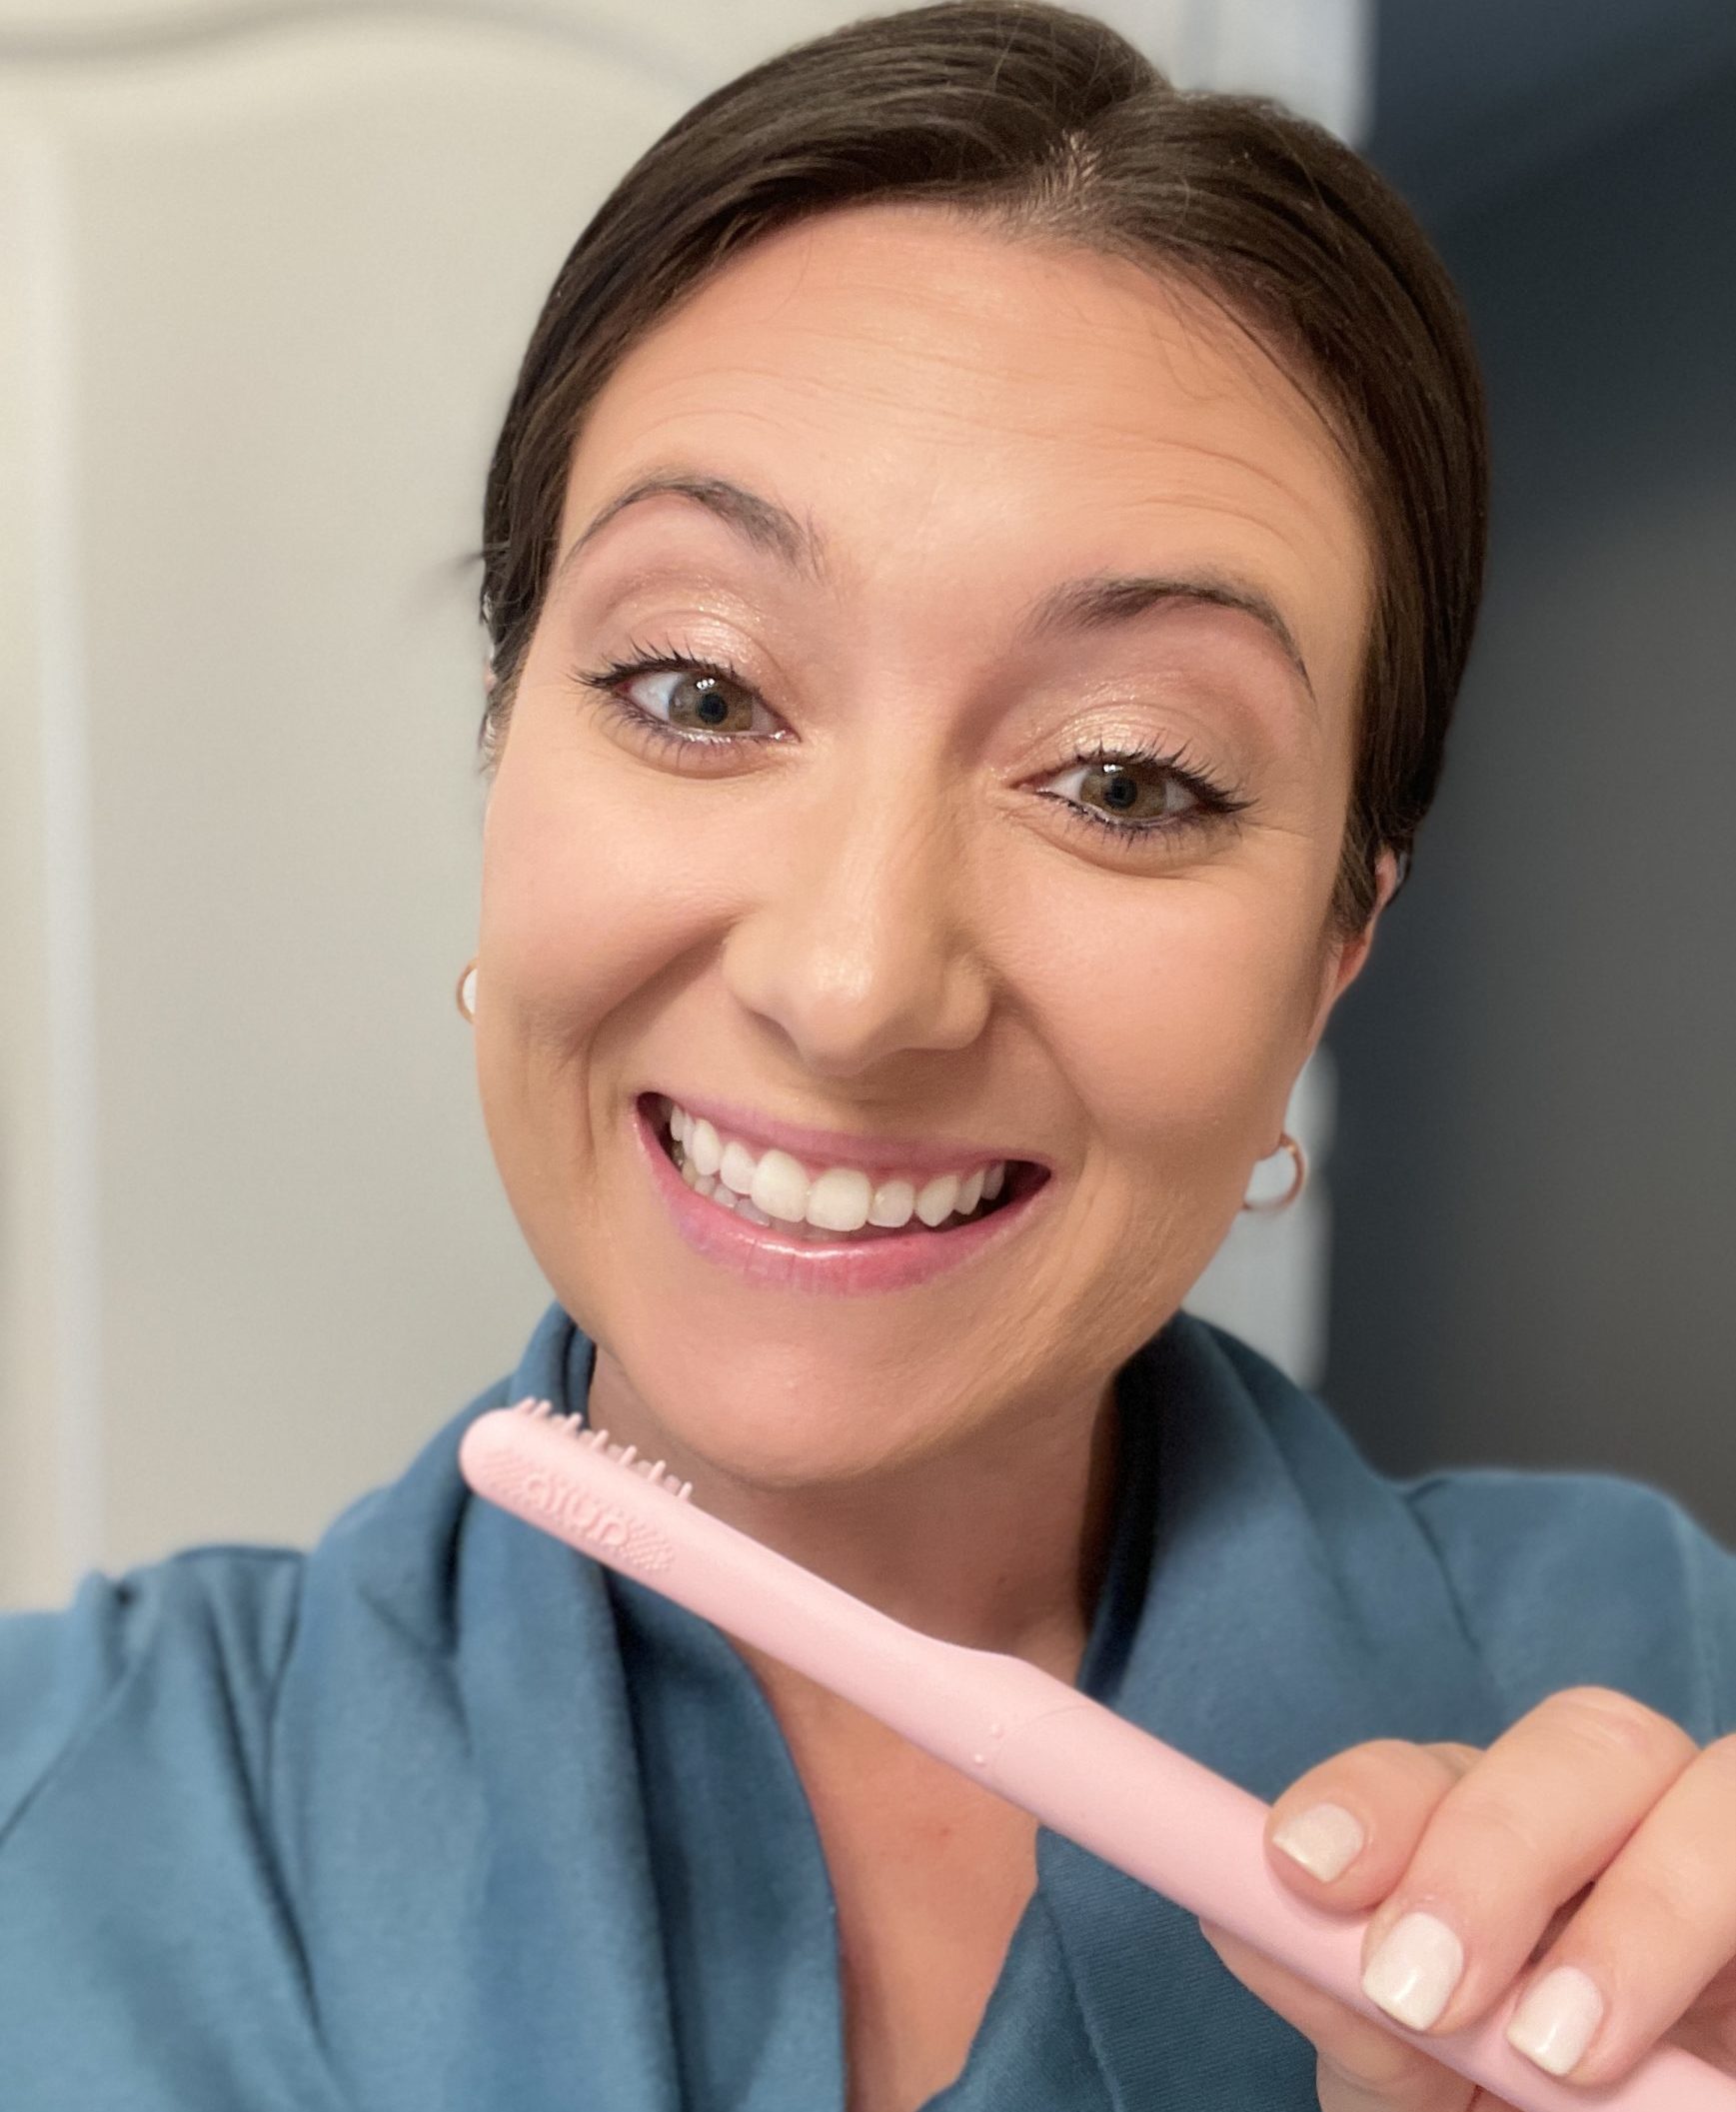 Is the new quip Toothbrush Worth the Hype?